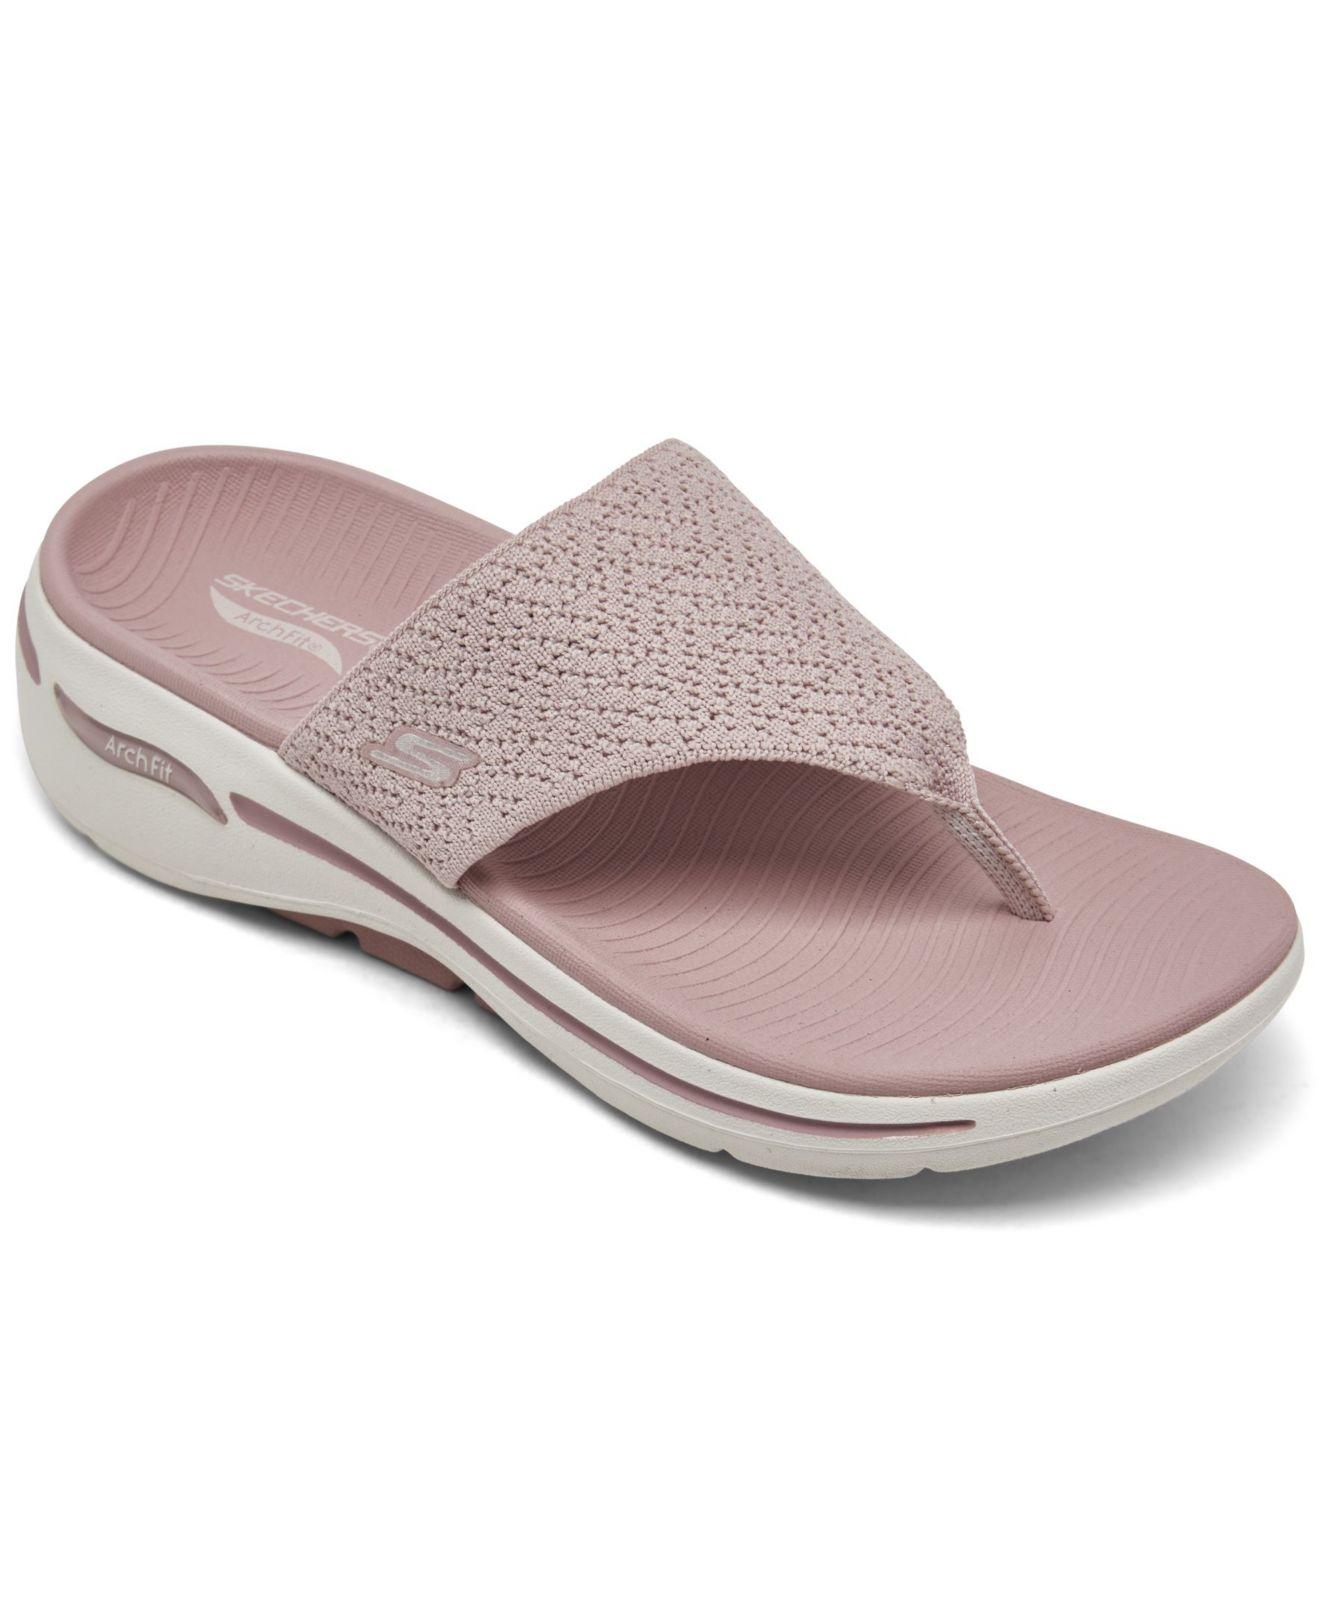 Skechers Go Walk Arch Fit - Weekender Arch Support Thong Flip Flop Walking  Sandals From Finish Line in Pink | Lyst